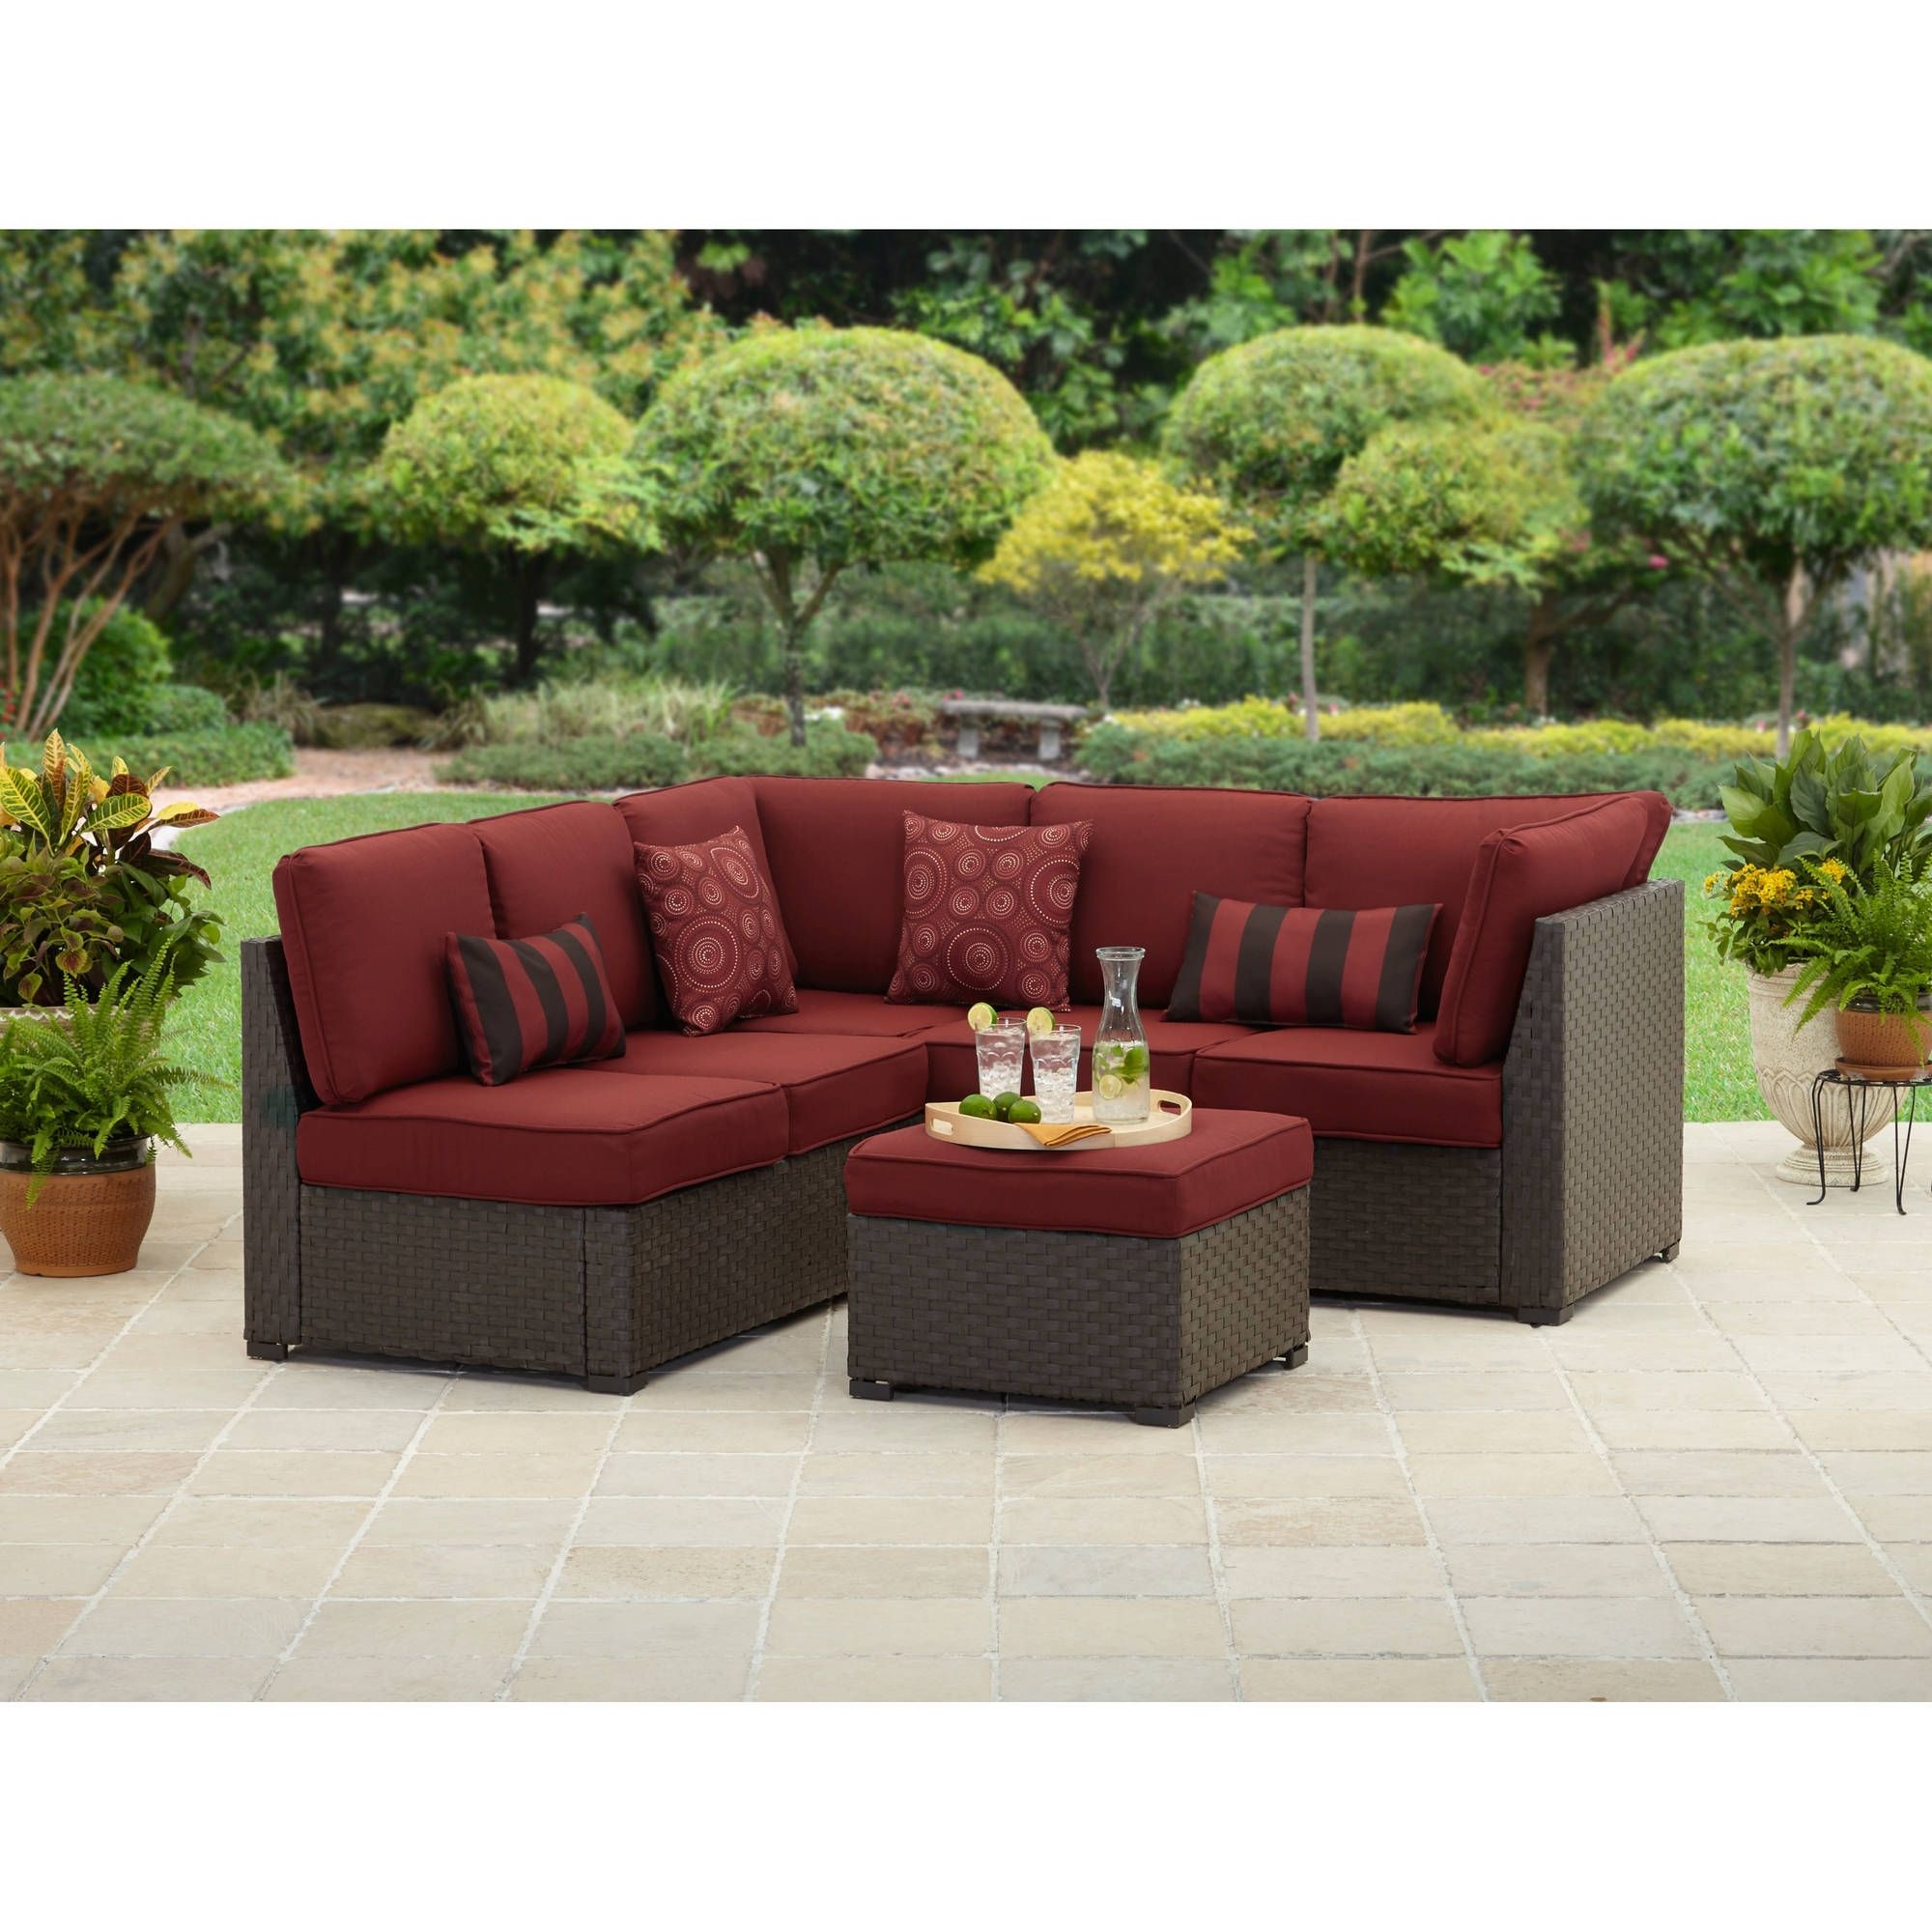 Better Homes And Gardens Rush Valley 3 Piece Outdoor Sectional Pertaining To Latest Patio Conversation Sets With Cushions (View 12 of 20)